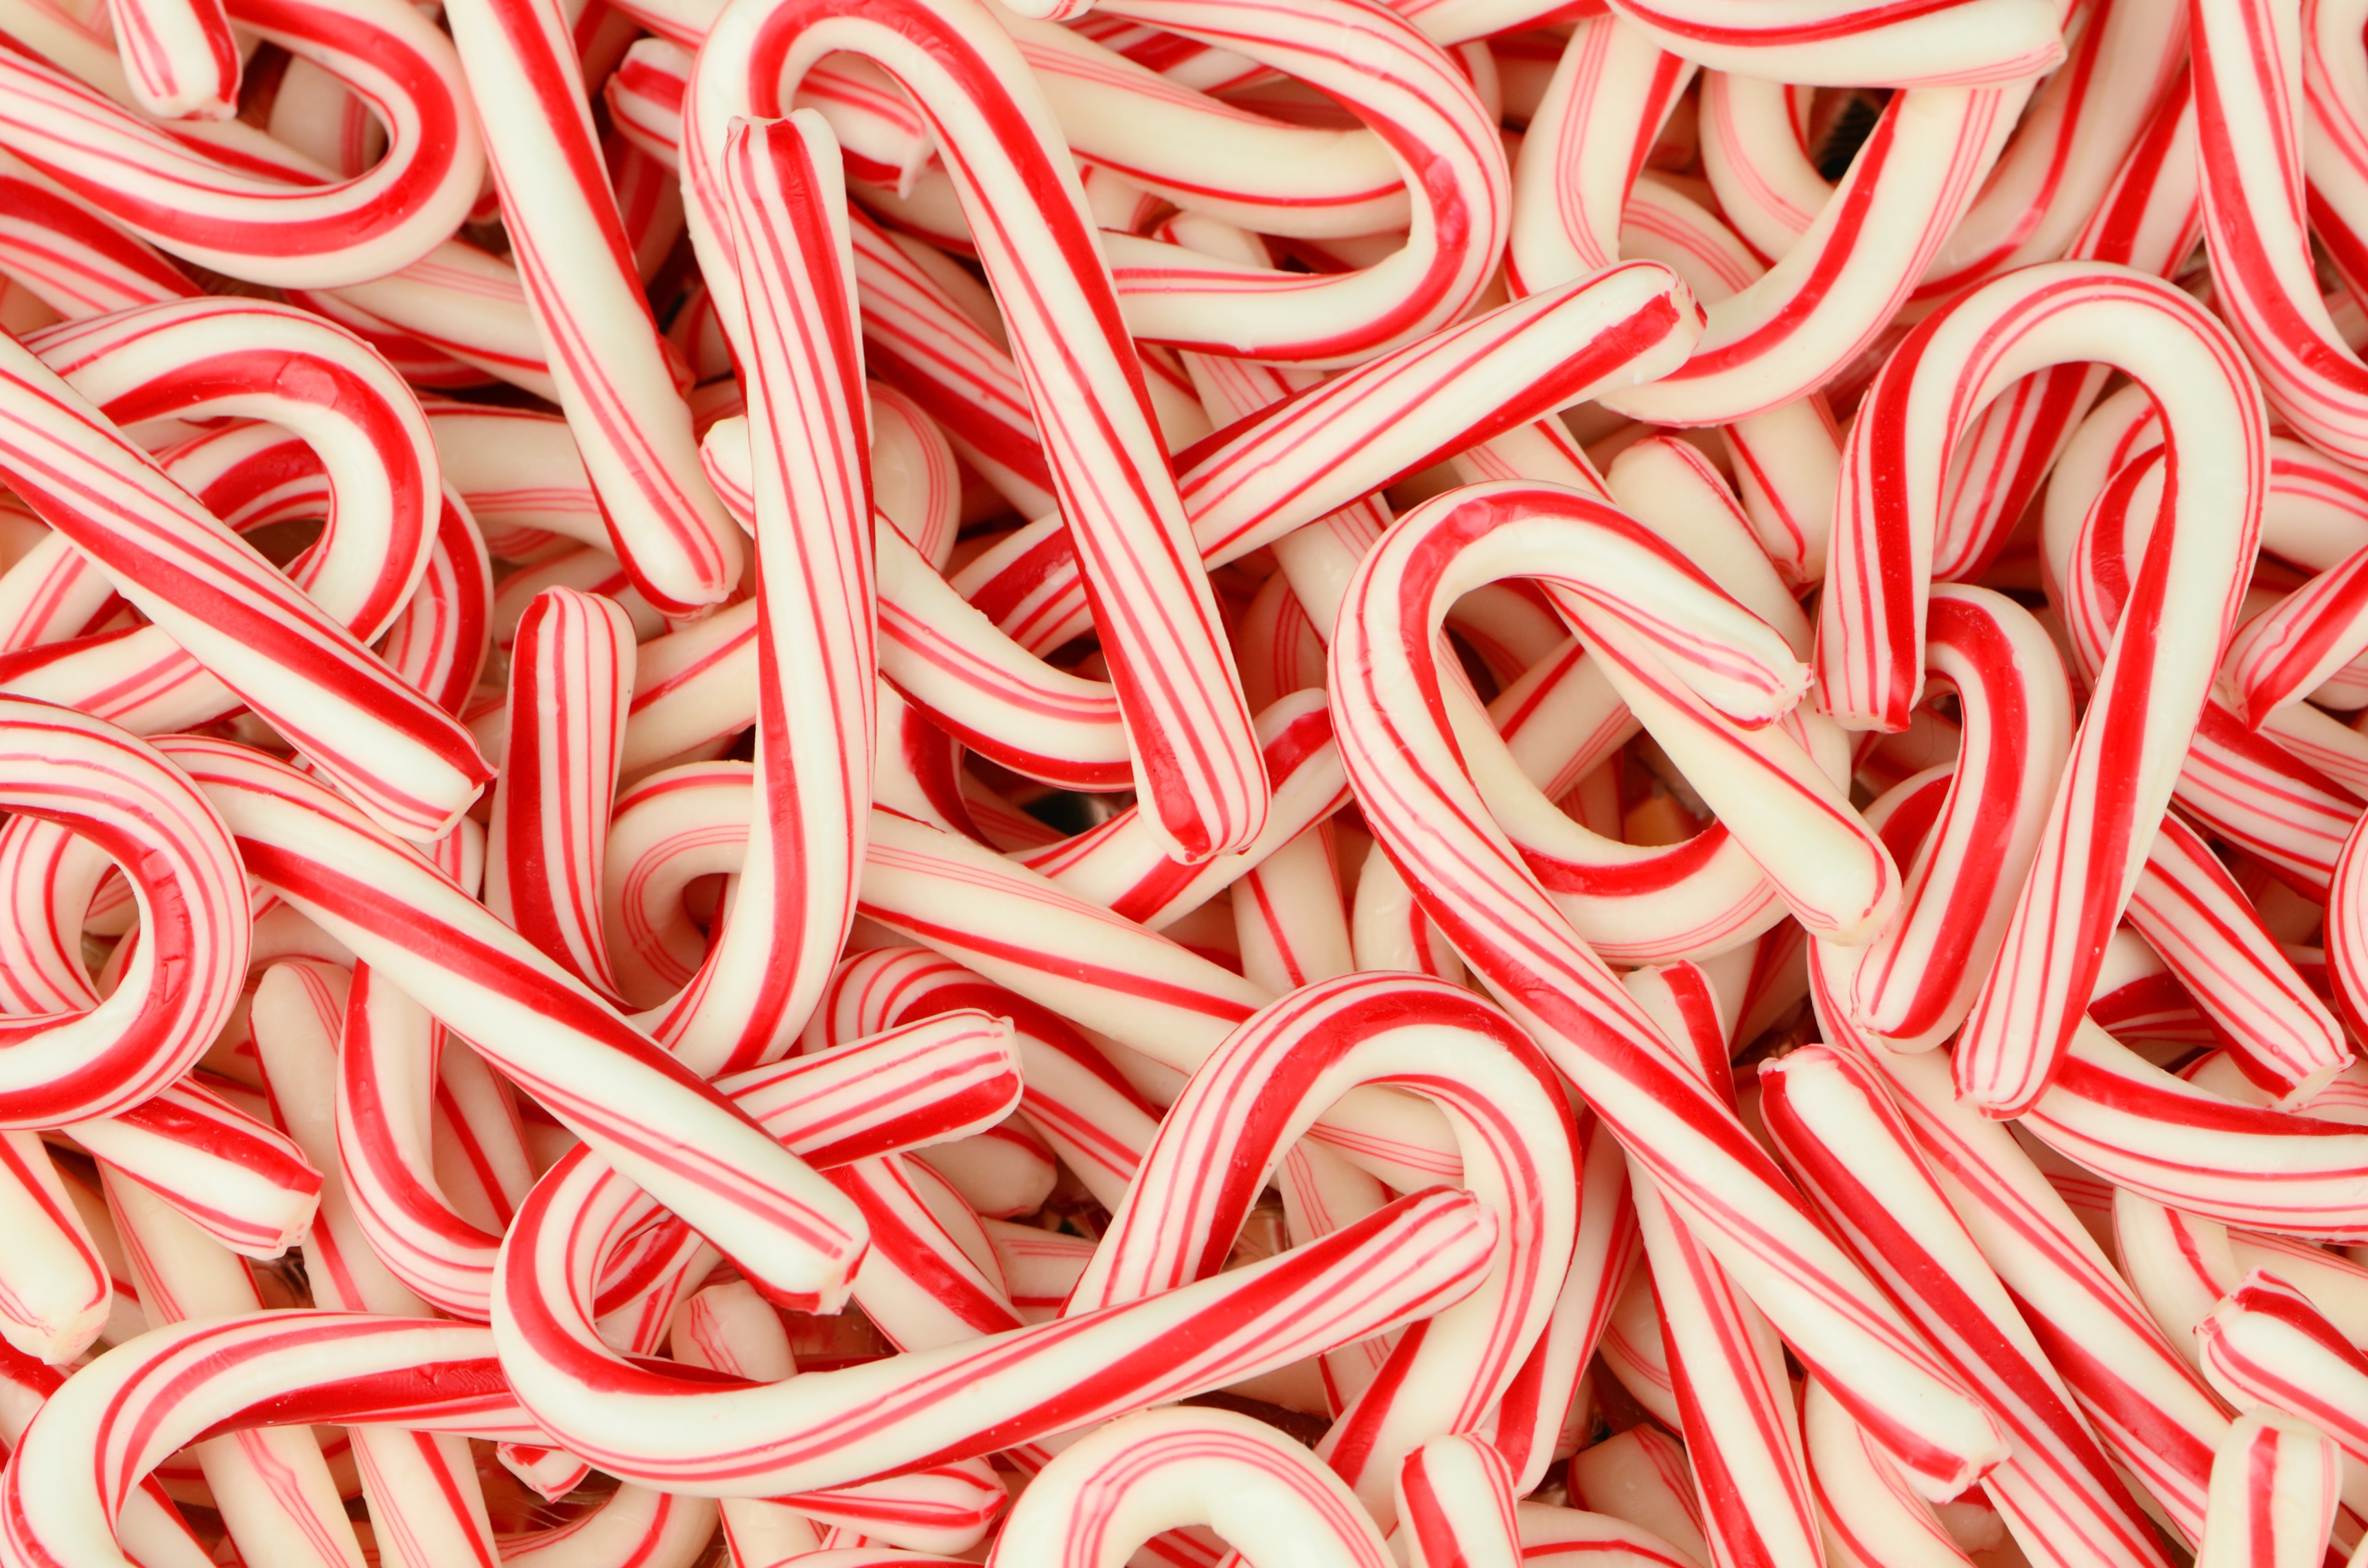 Gallery For gt Candy Cane Wallpaper